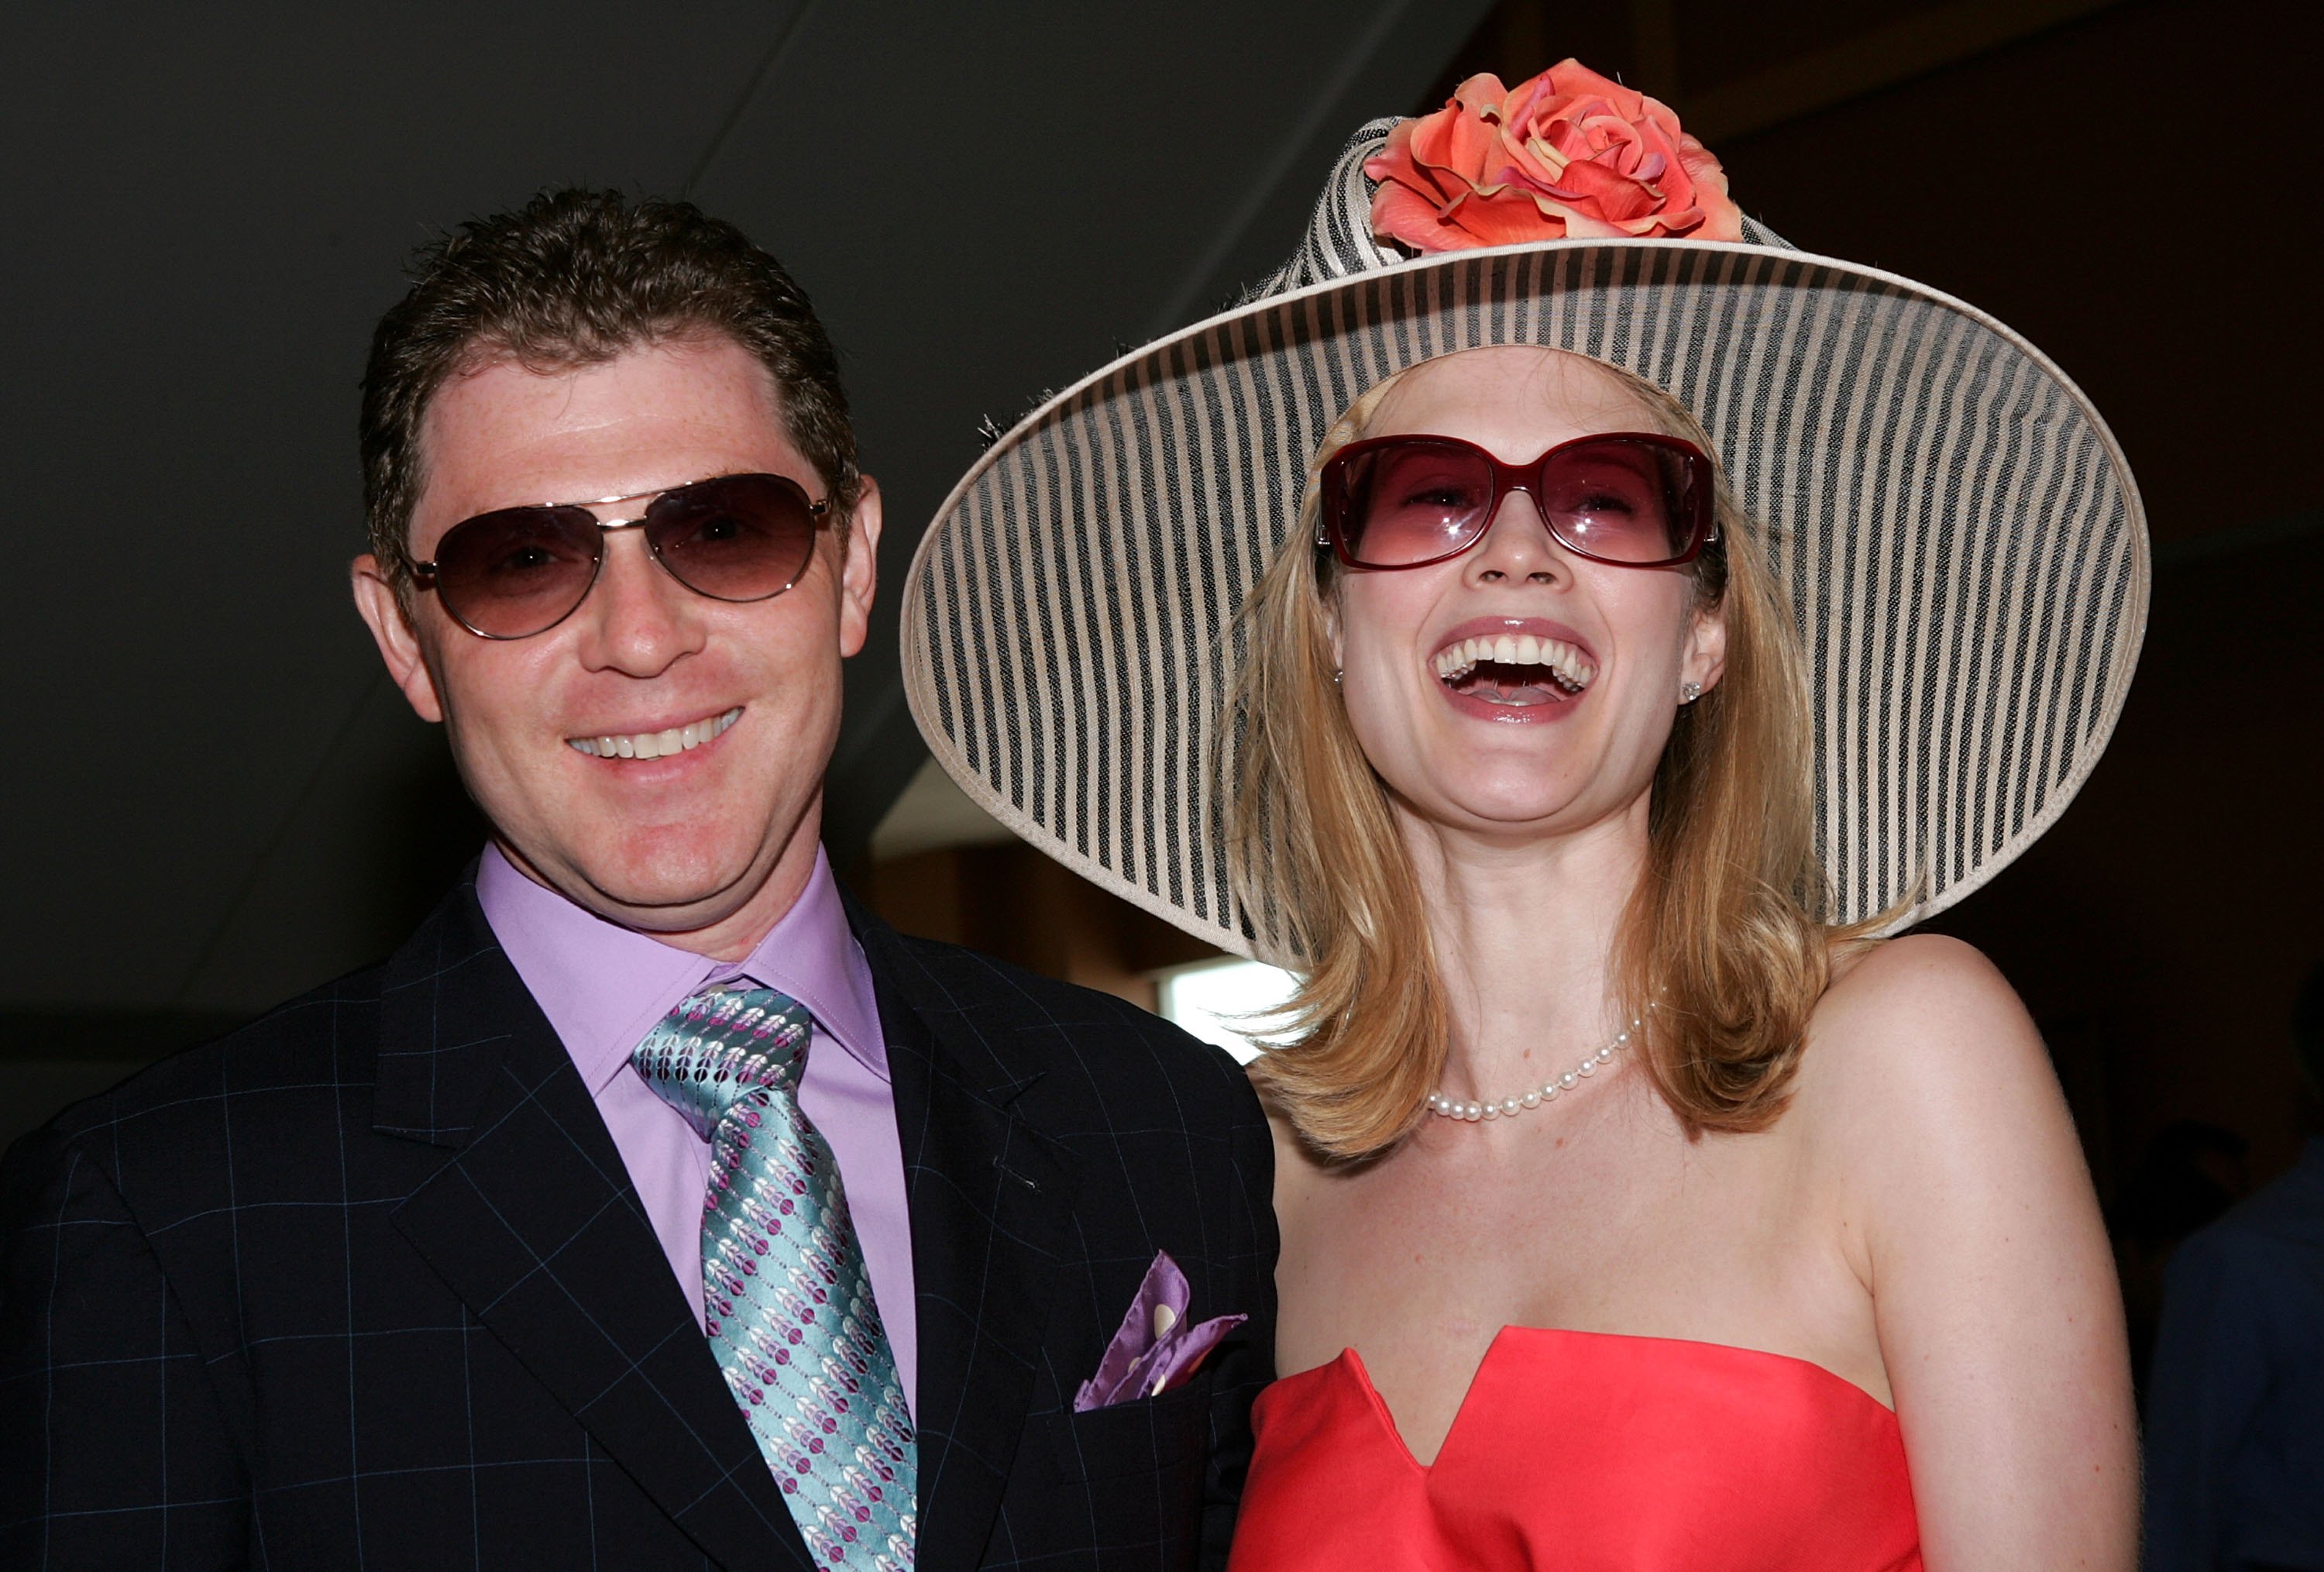 Bobby Flay and actress Stephanie March attend the 132nd Kentucky Derby